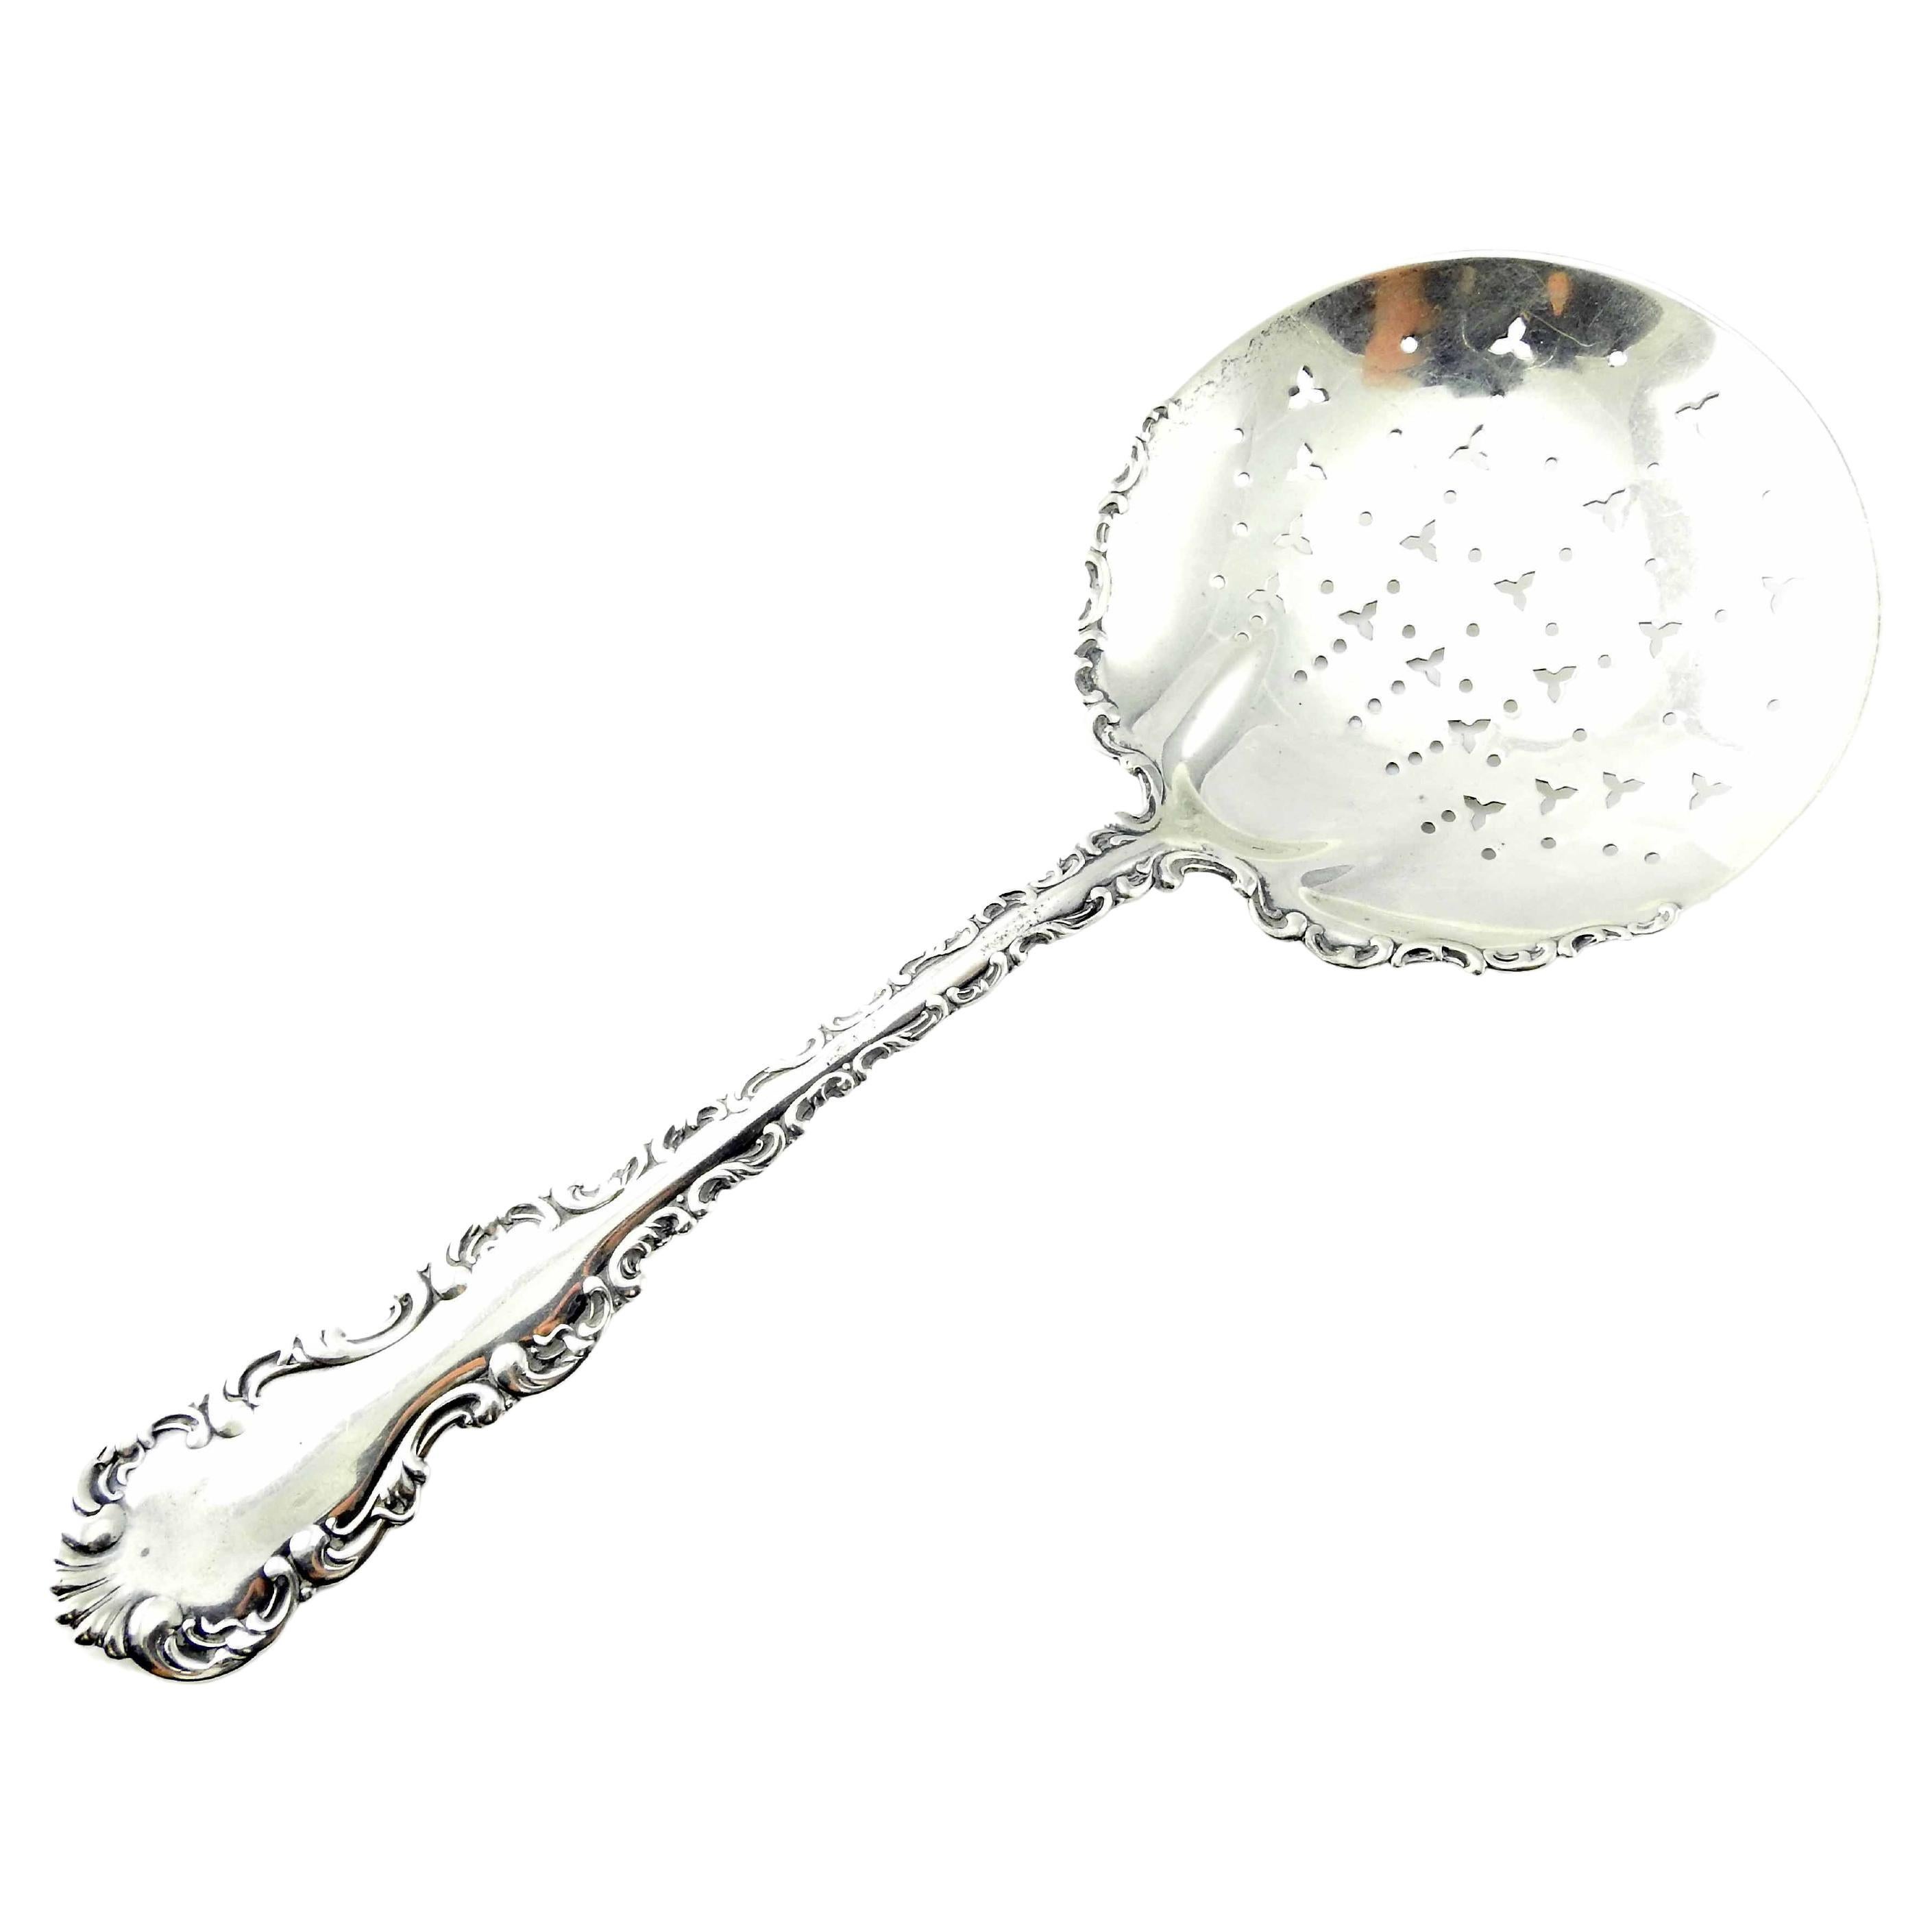 Whiting Manufacturing Co Sterl Silver Louis XV Pierced Pea Serving Spoon #4388 For Sale